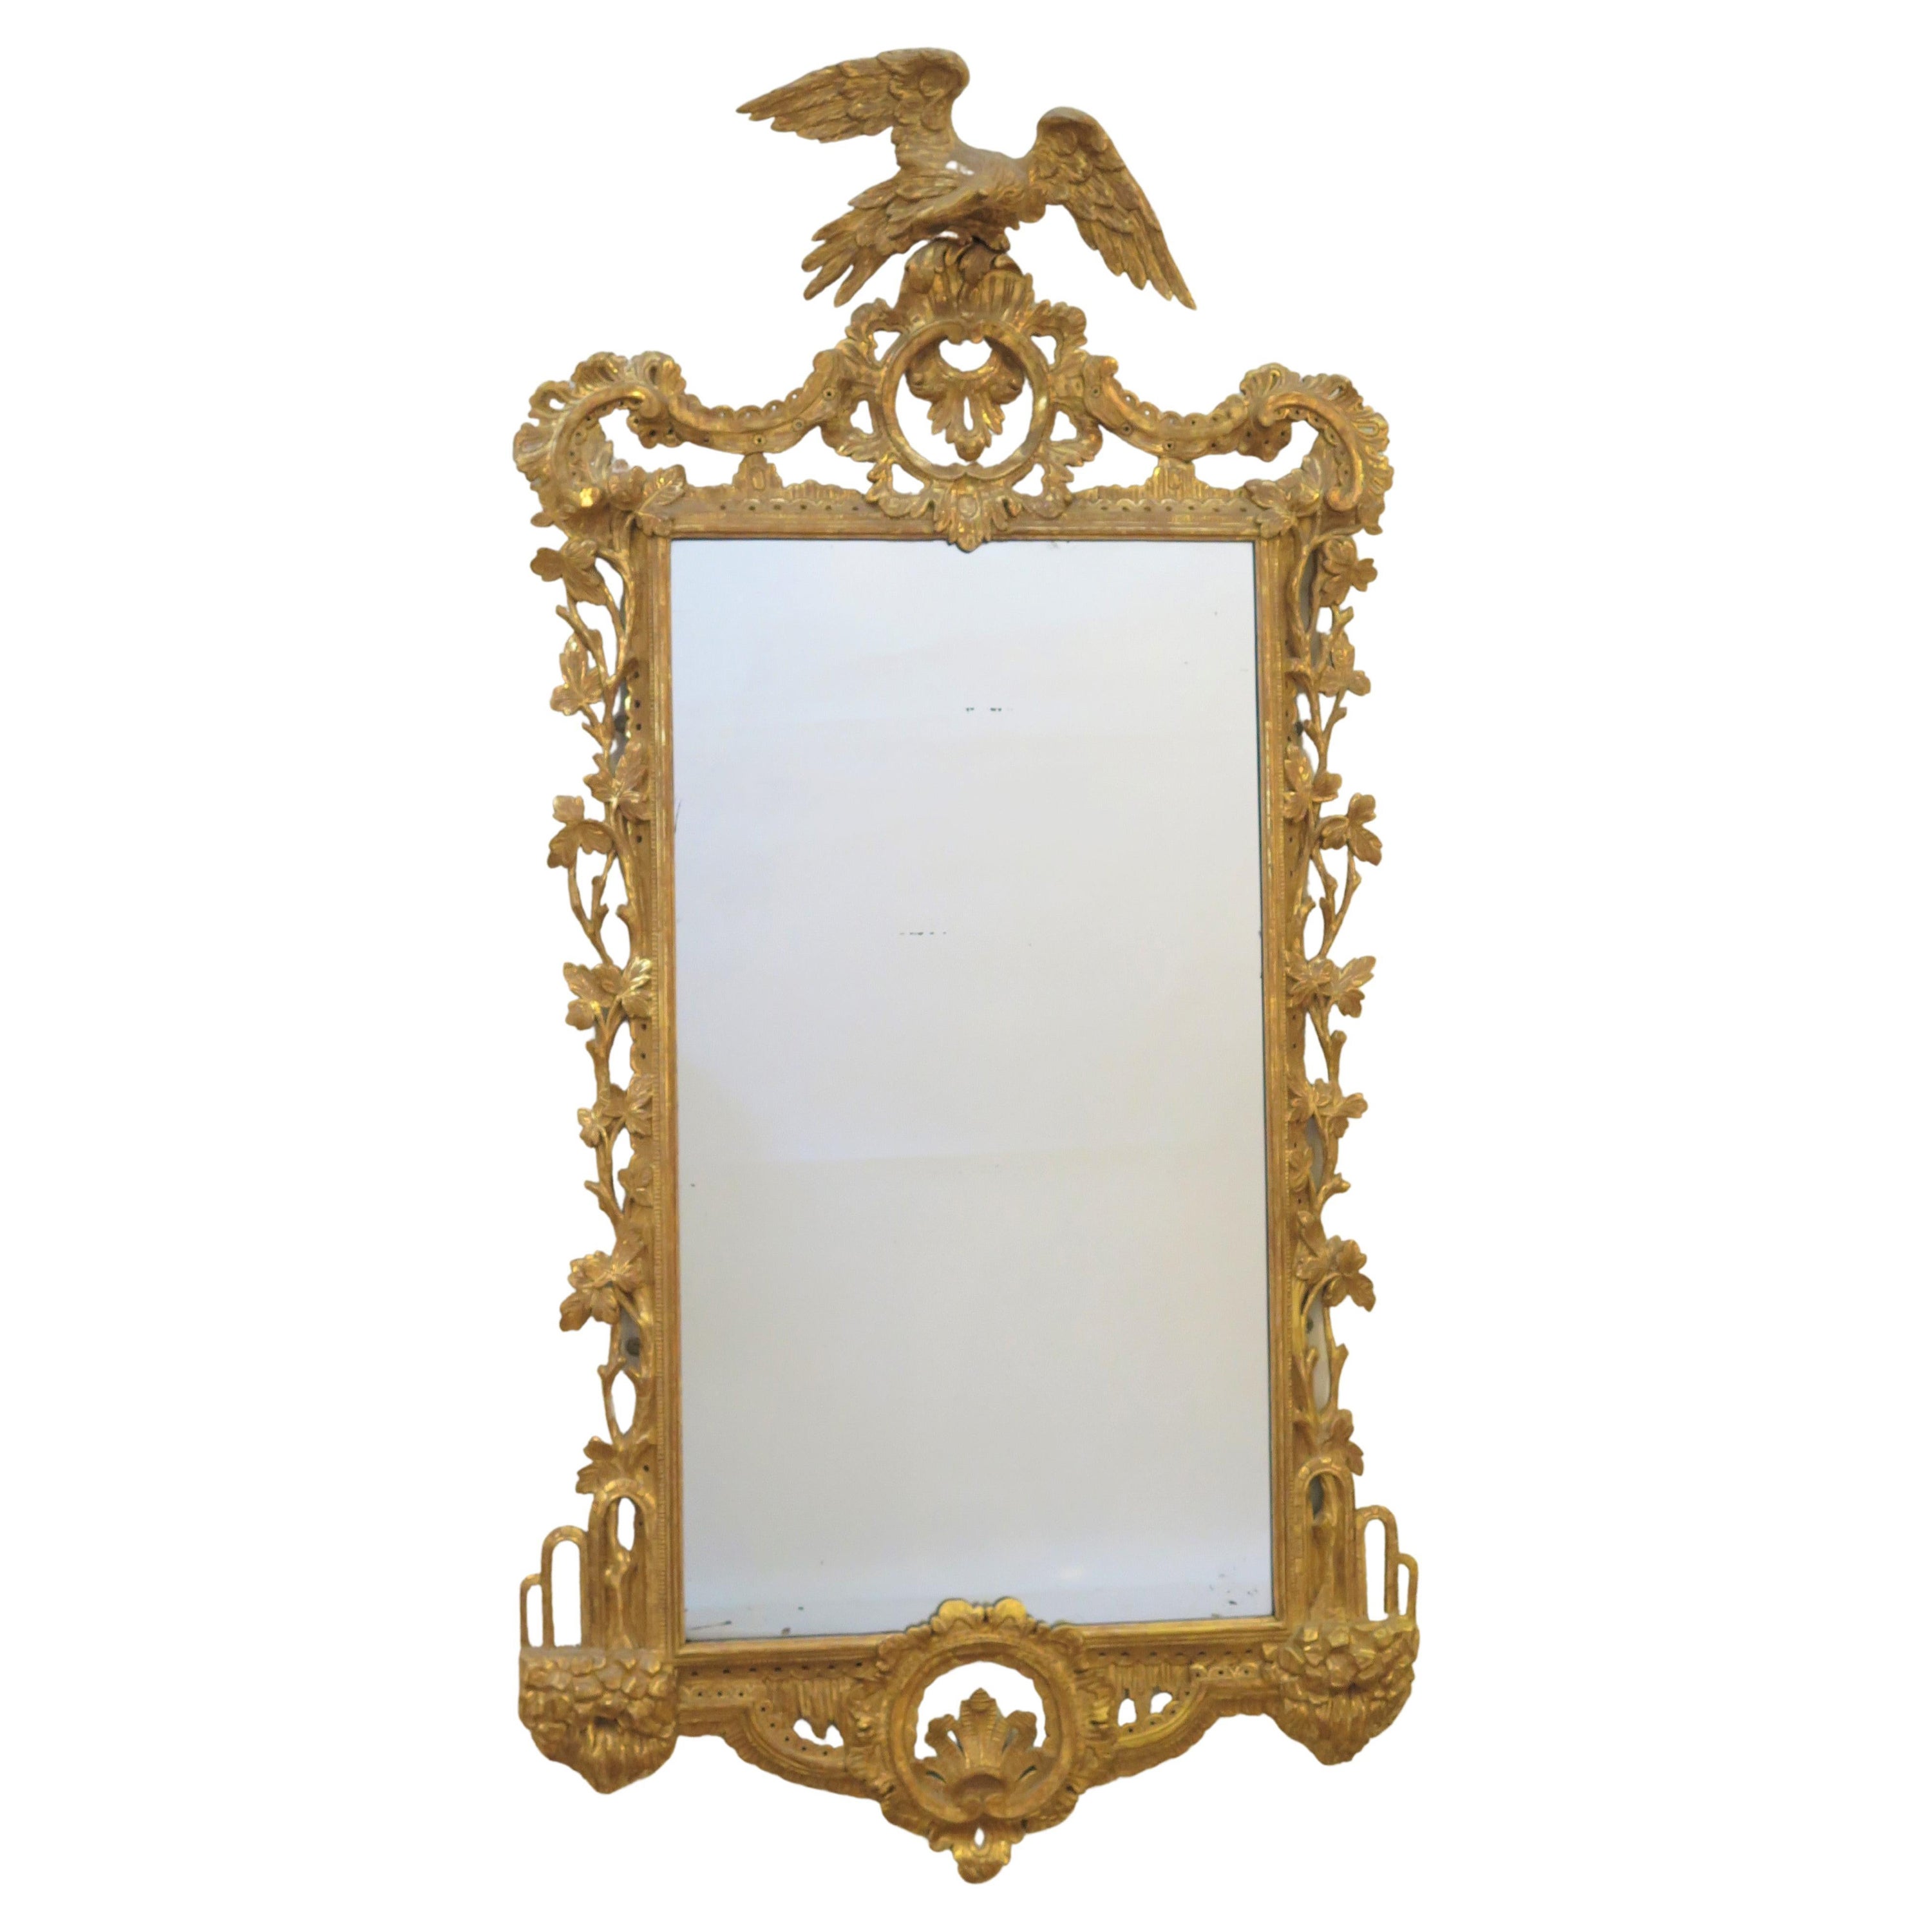 A Fine George II Carved Giltwood Mirror with Phoenix Crest